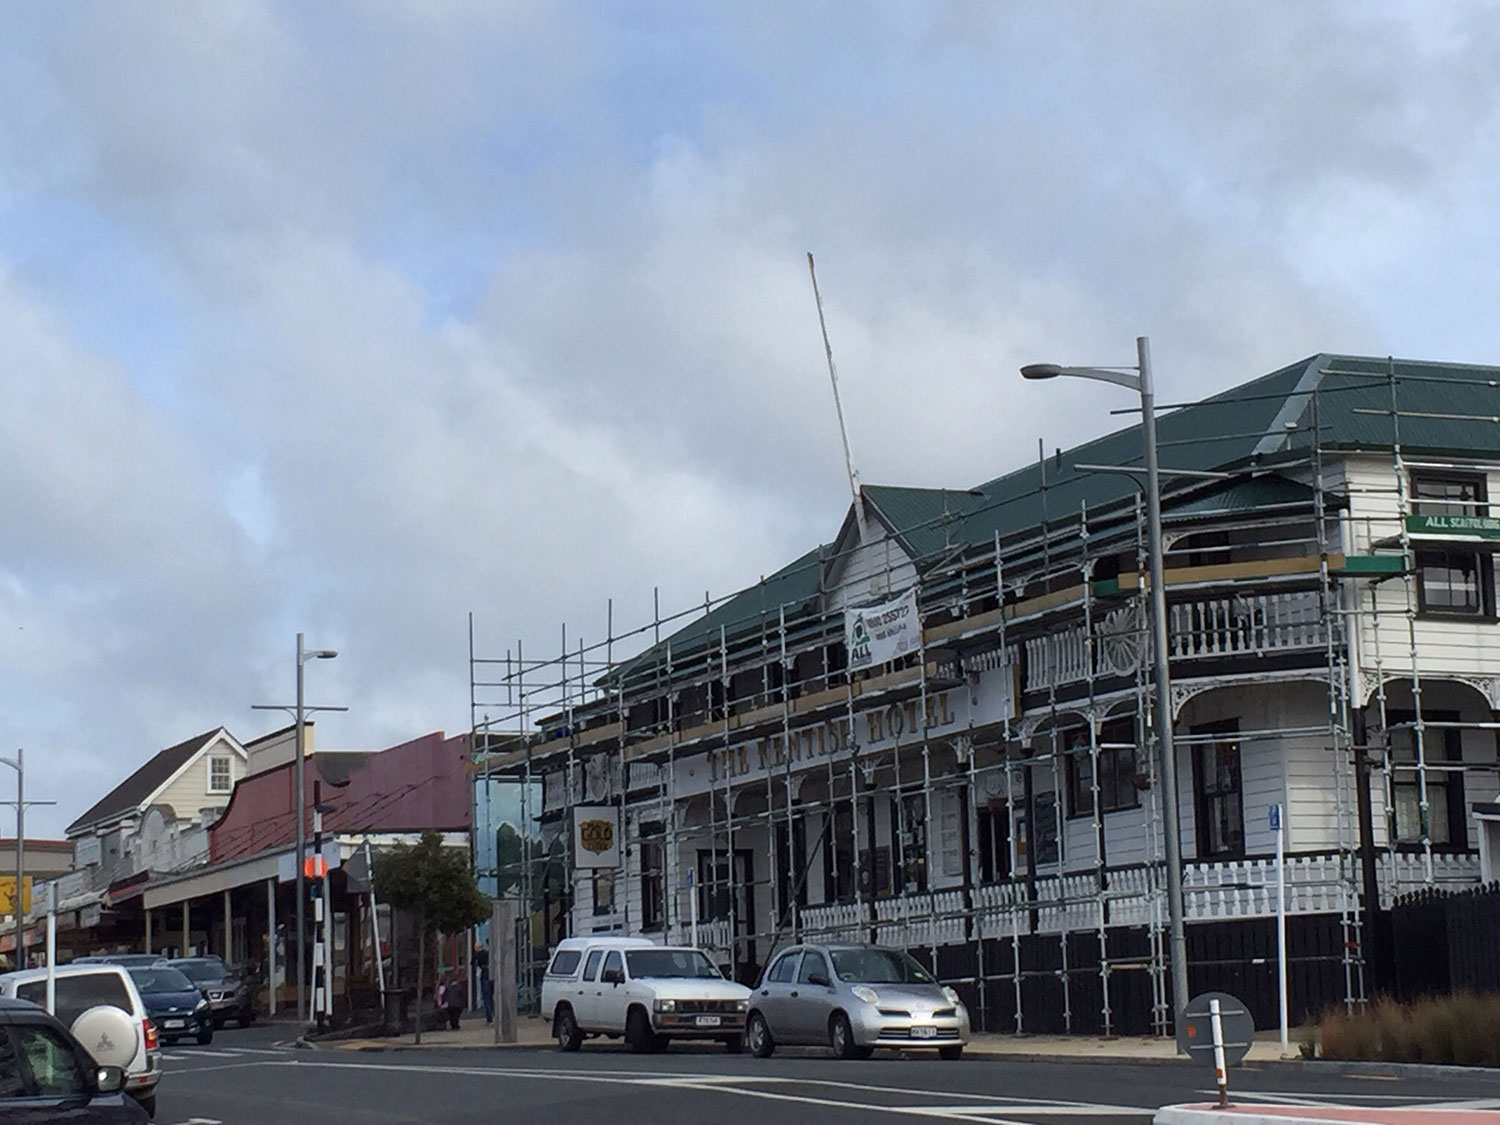 auckland roofing solutions services auckland and new zealand wide new roofs repair cladding and more Project gallery 53